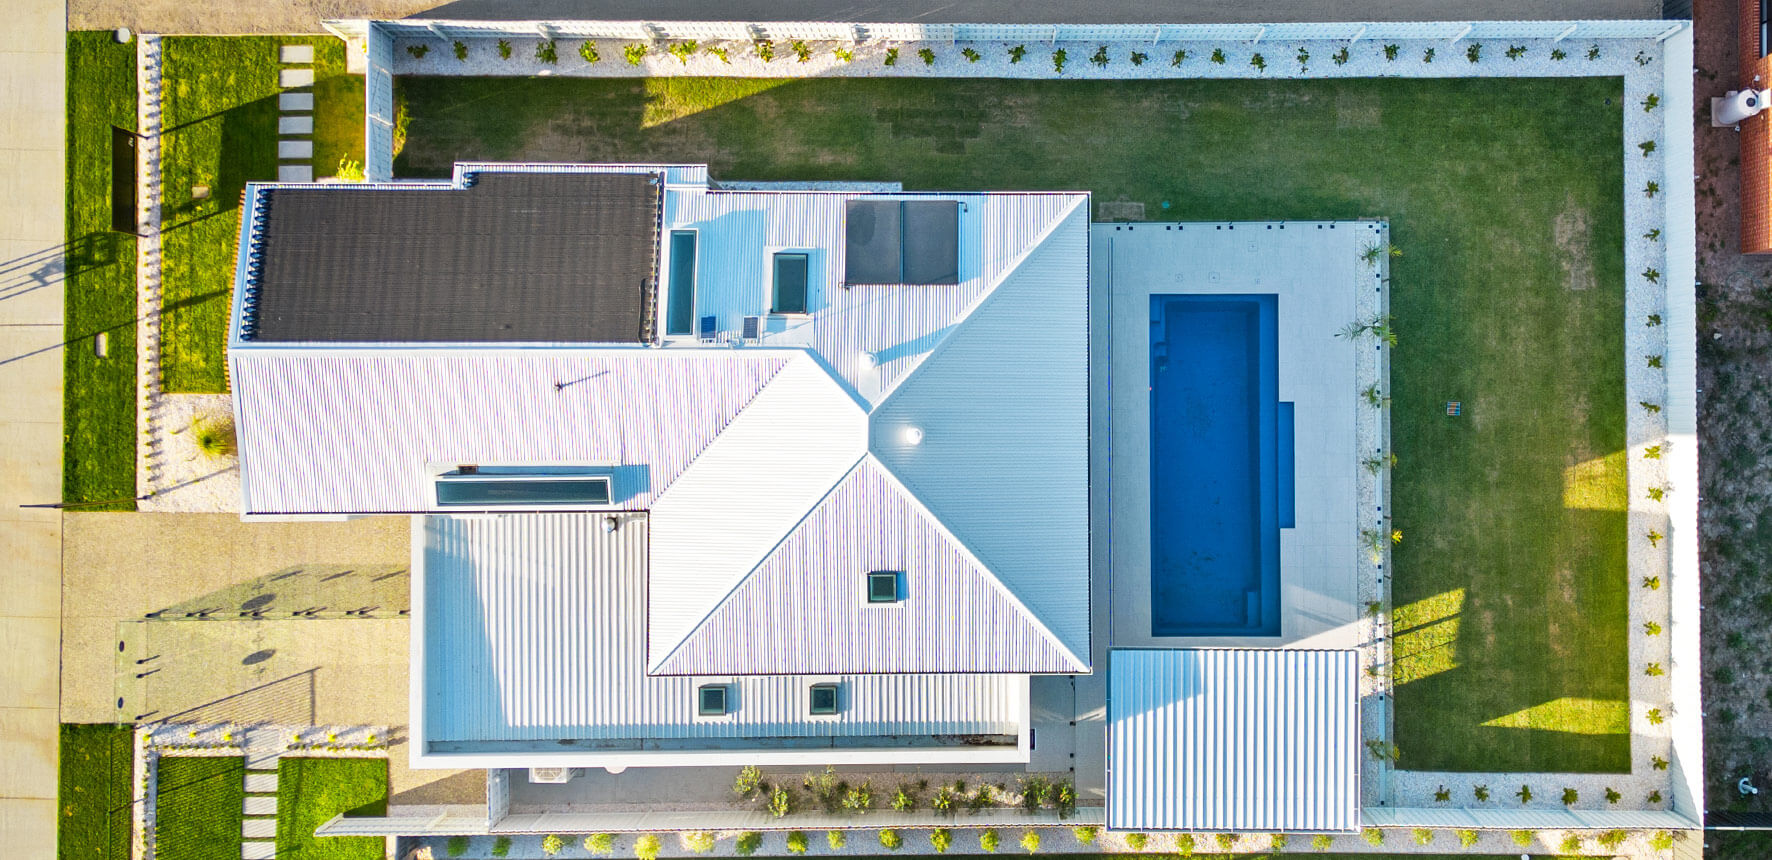 Aerial view of display home by Virtue Homes